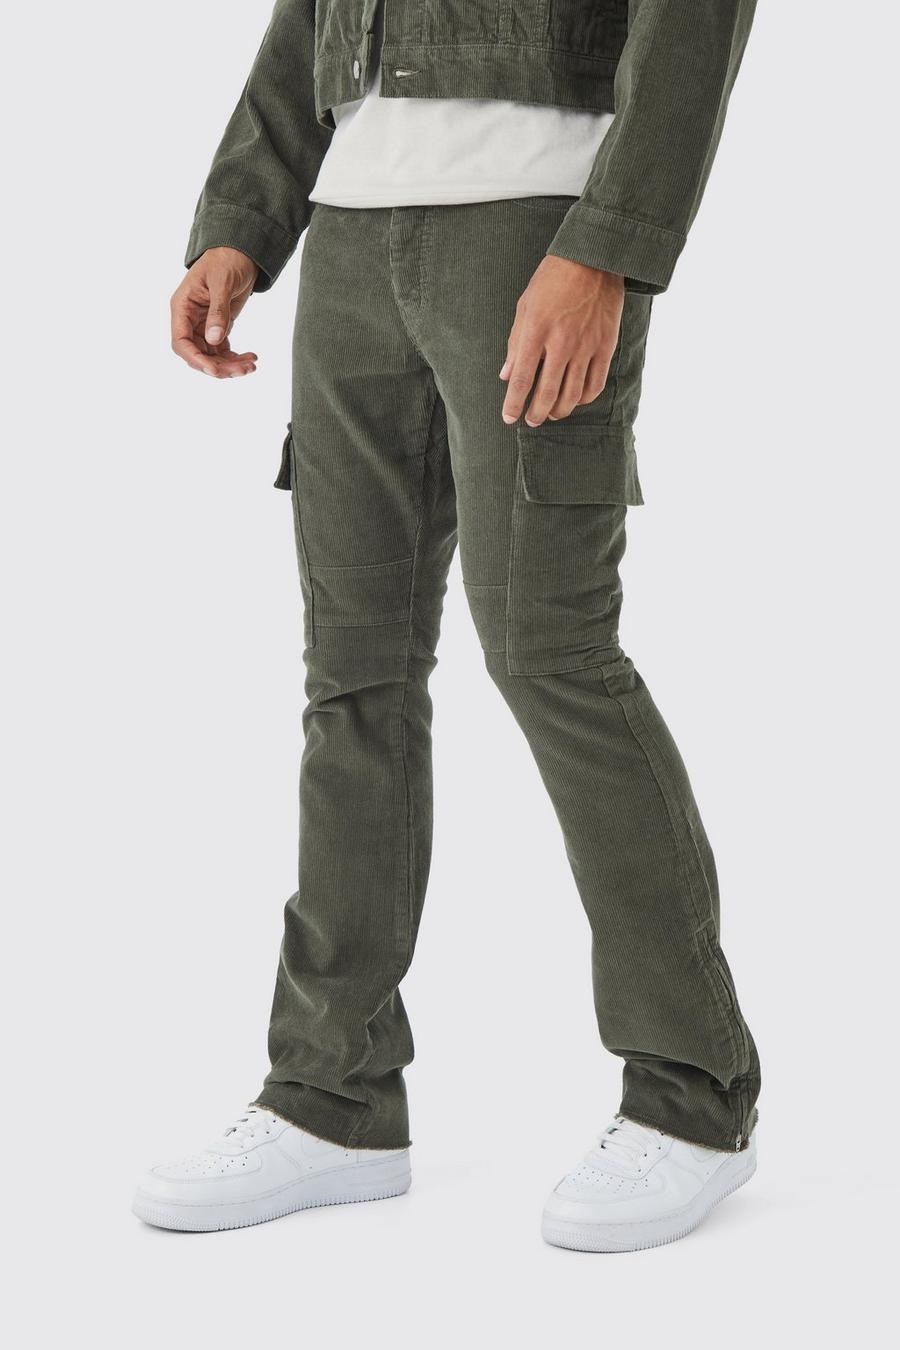 Olive green Fixed Waist Slim Flare Zip Gusset Cord Cargo Trouser